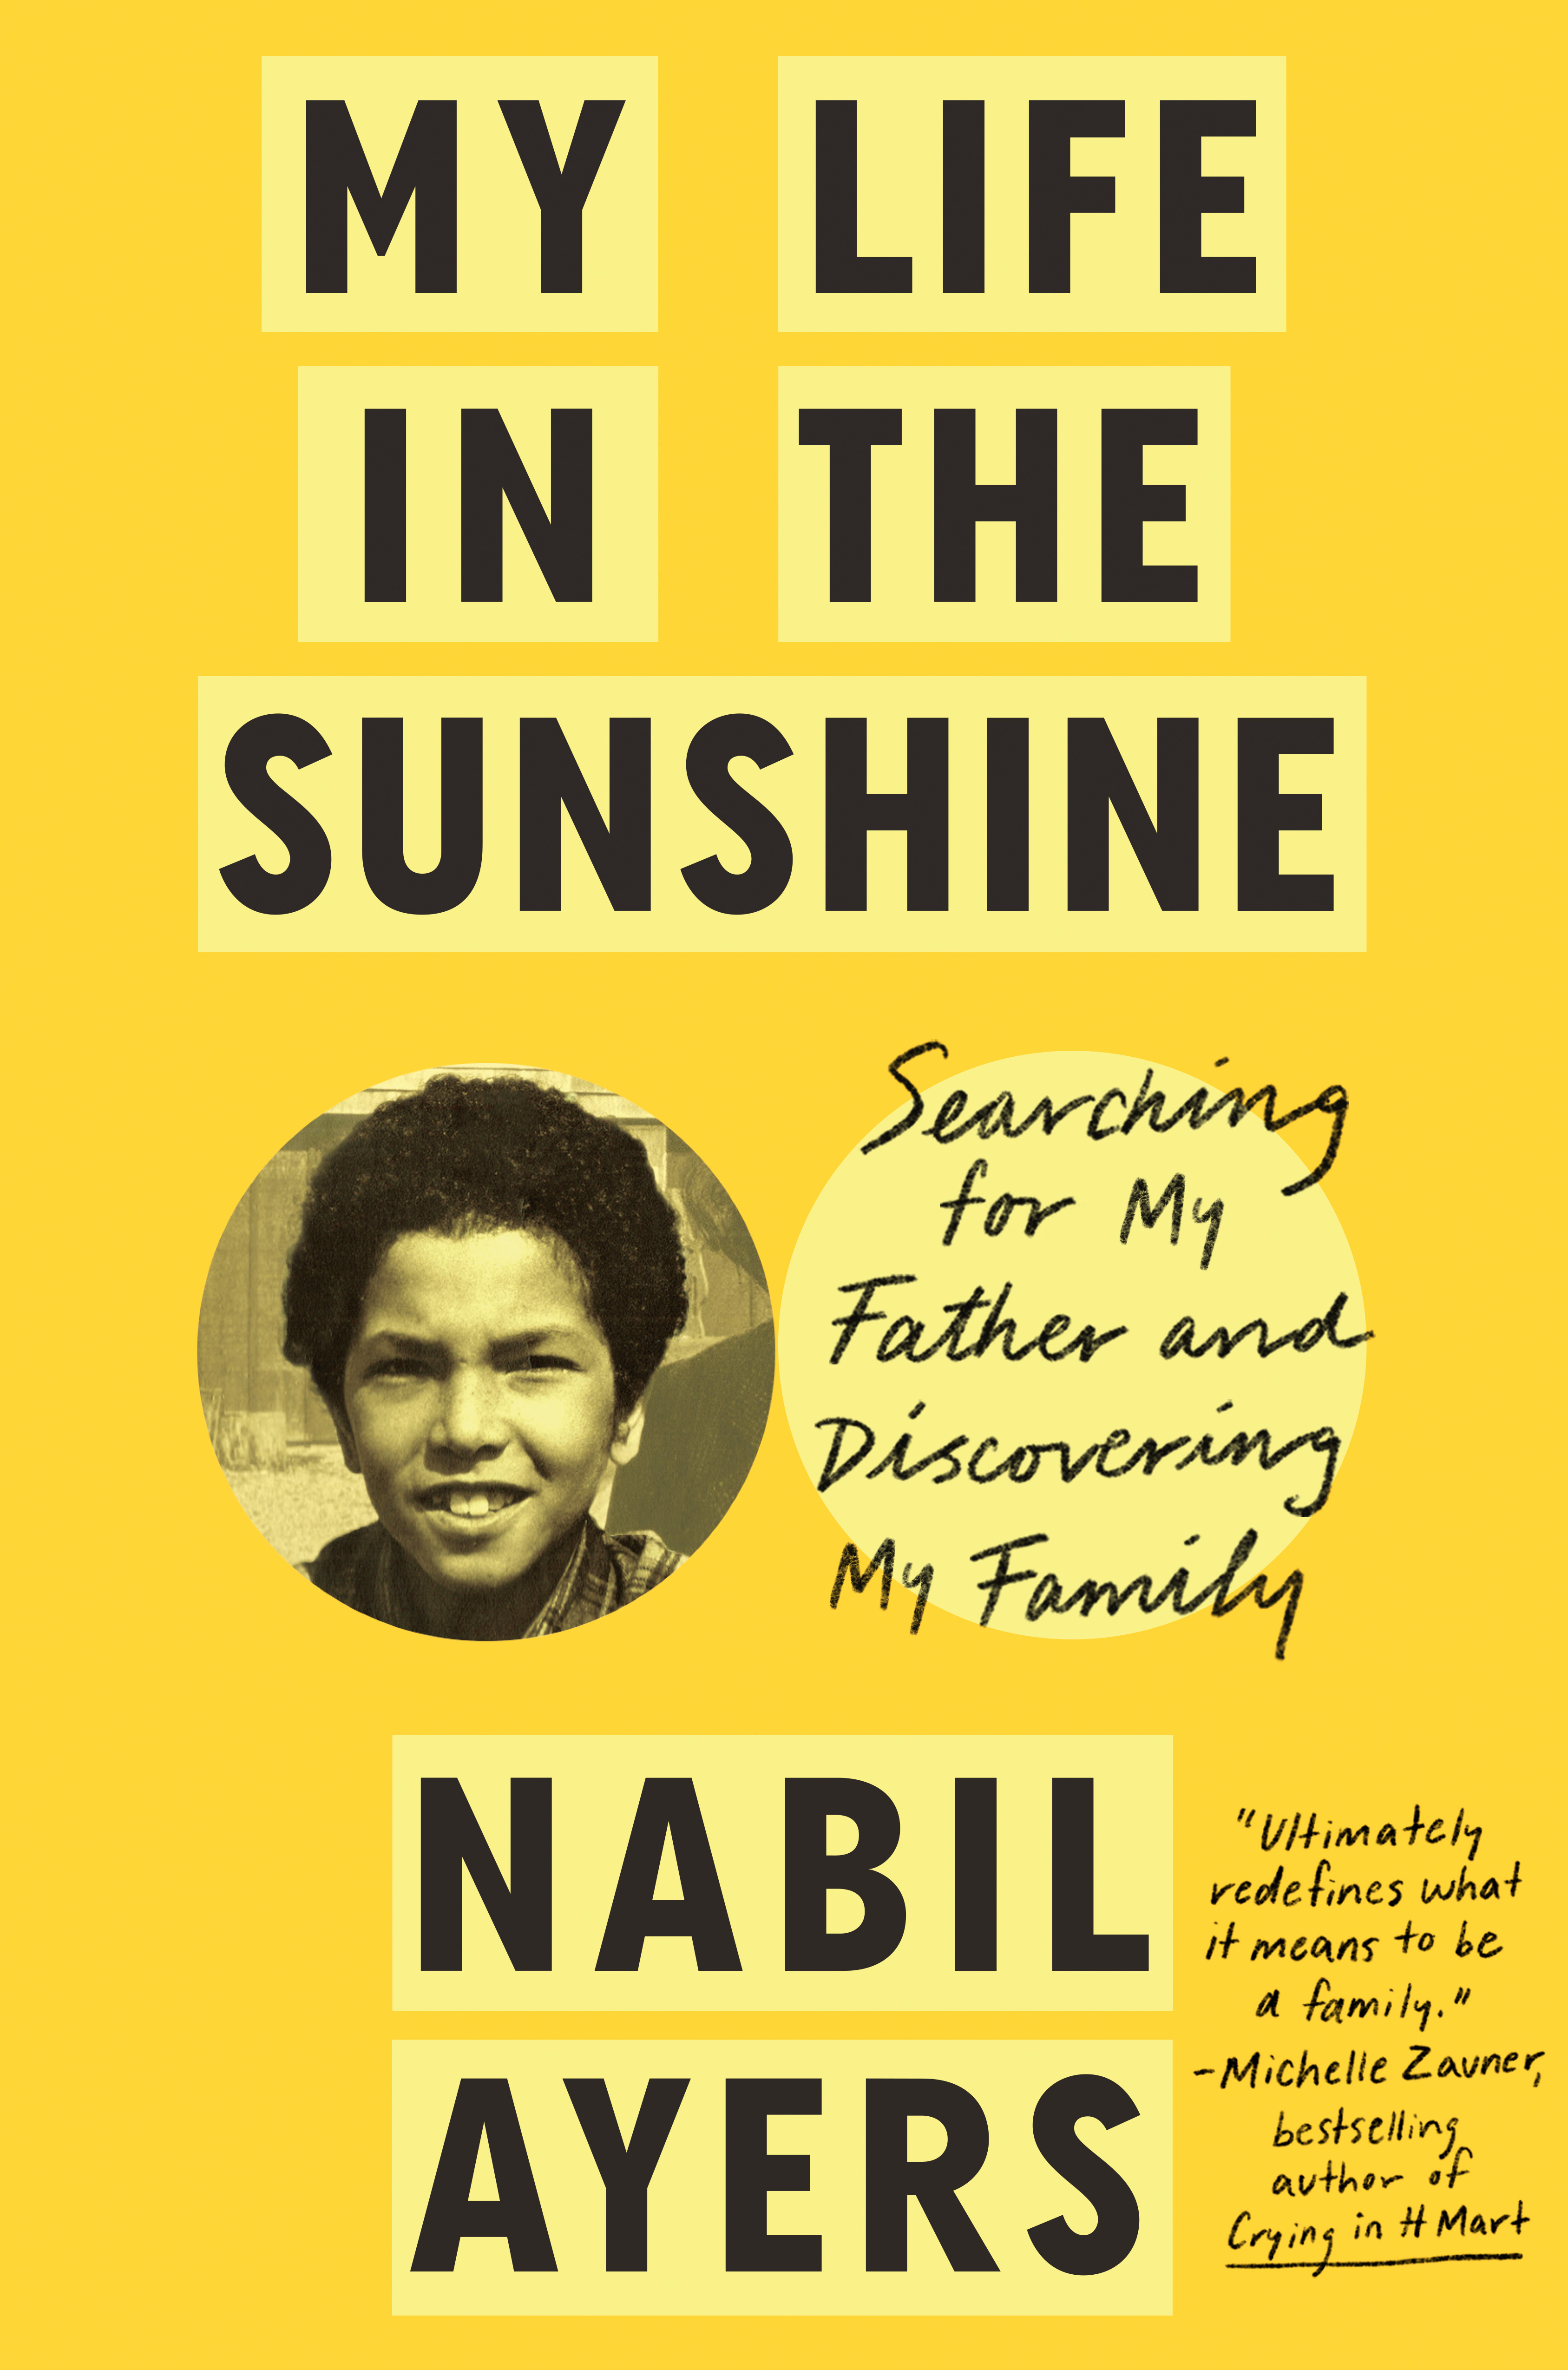 My Life in the Sunshine : Searching for My Father and Discovering My Family | Biography & Memoir